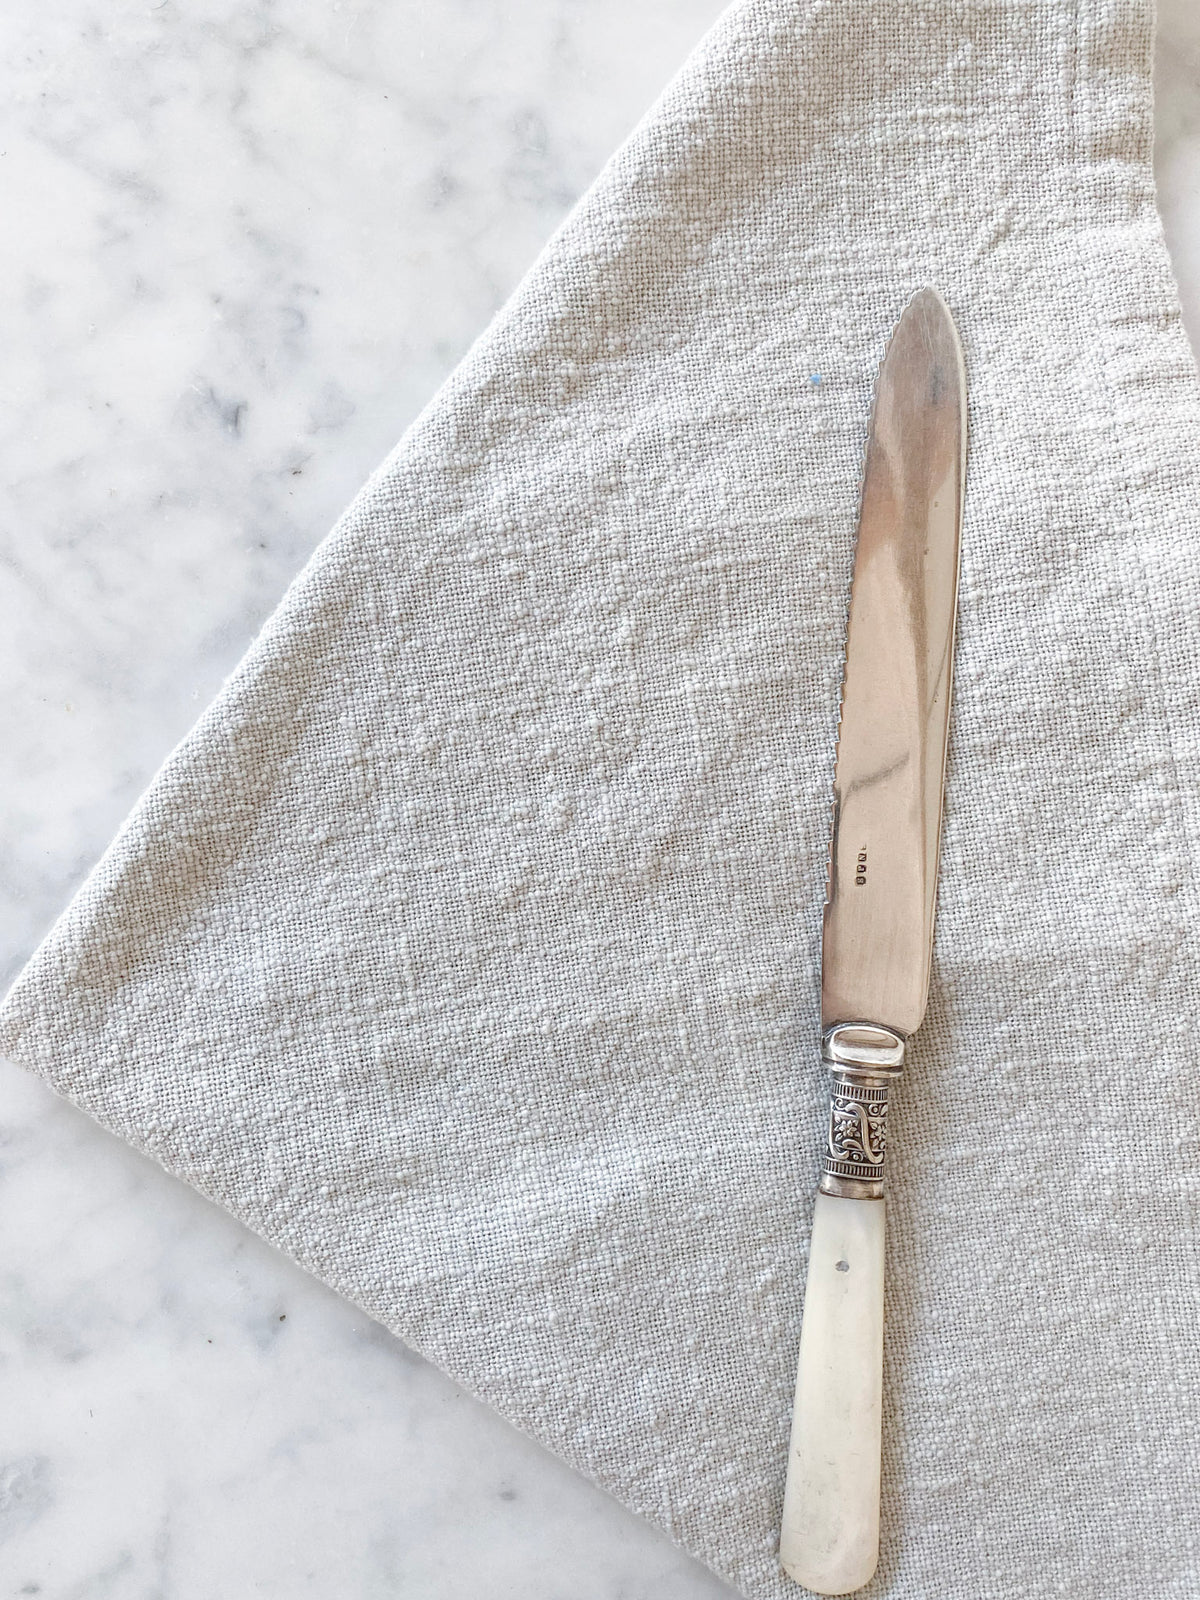 Antique Mother of Pearl Cake/Bread Knife